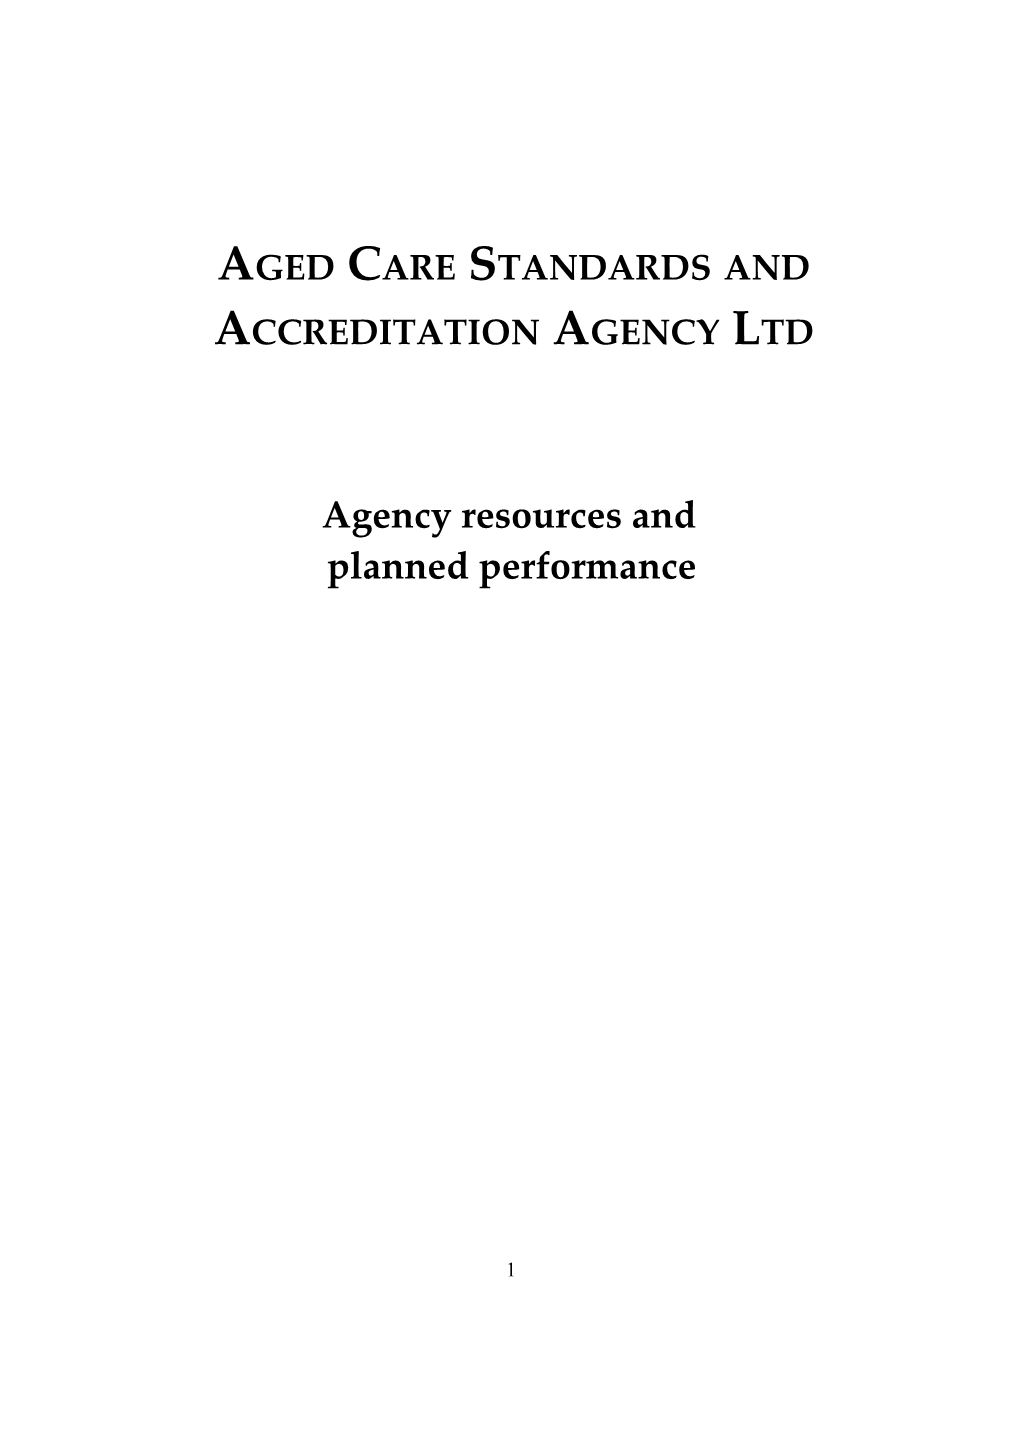 Aged Care Standards and Accreditation Agency Ltd